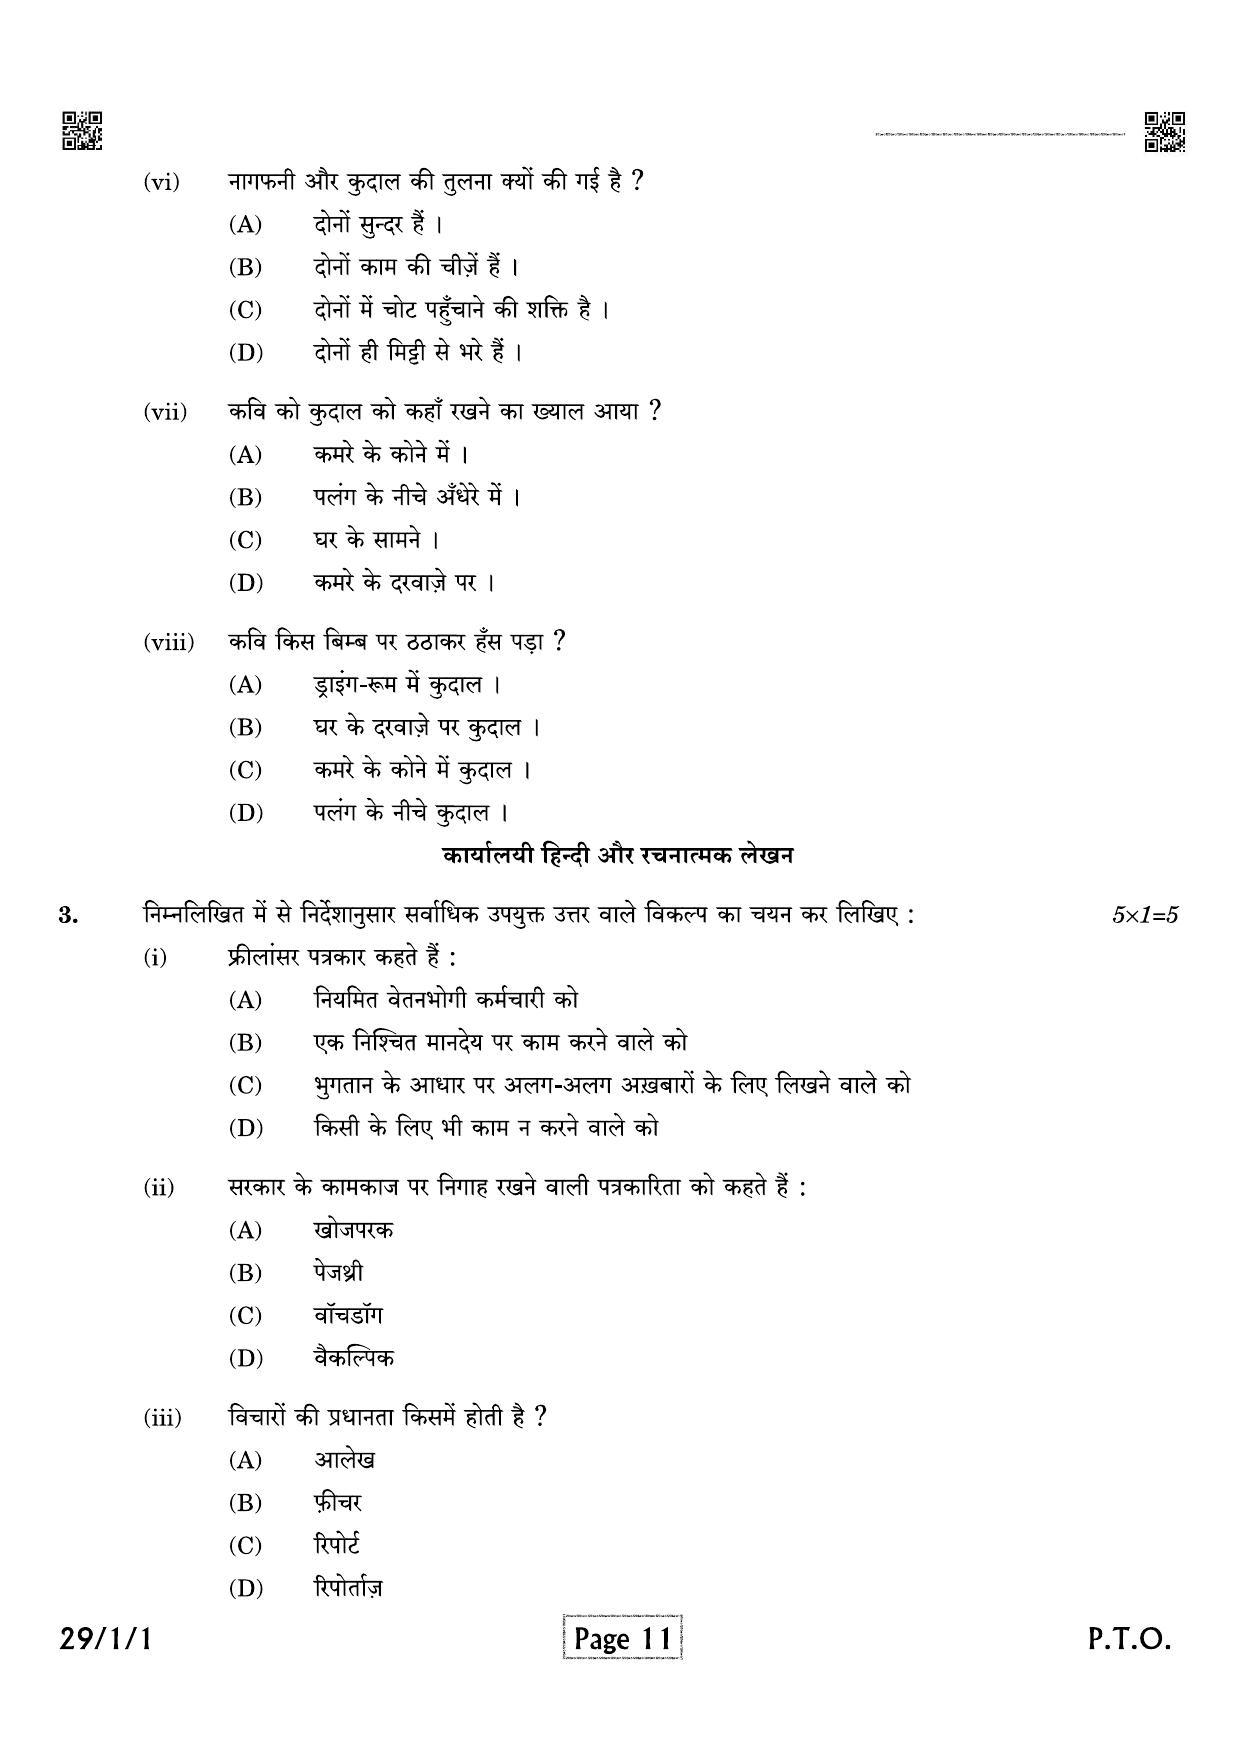 CBSE Class 12 QP_002_HINDI_ELECTIVE 2021 Compartment Question Paper - Page 11